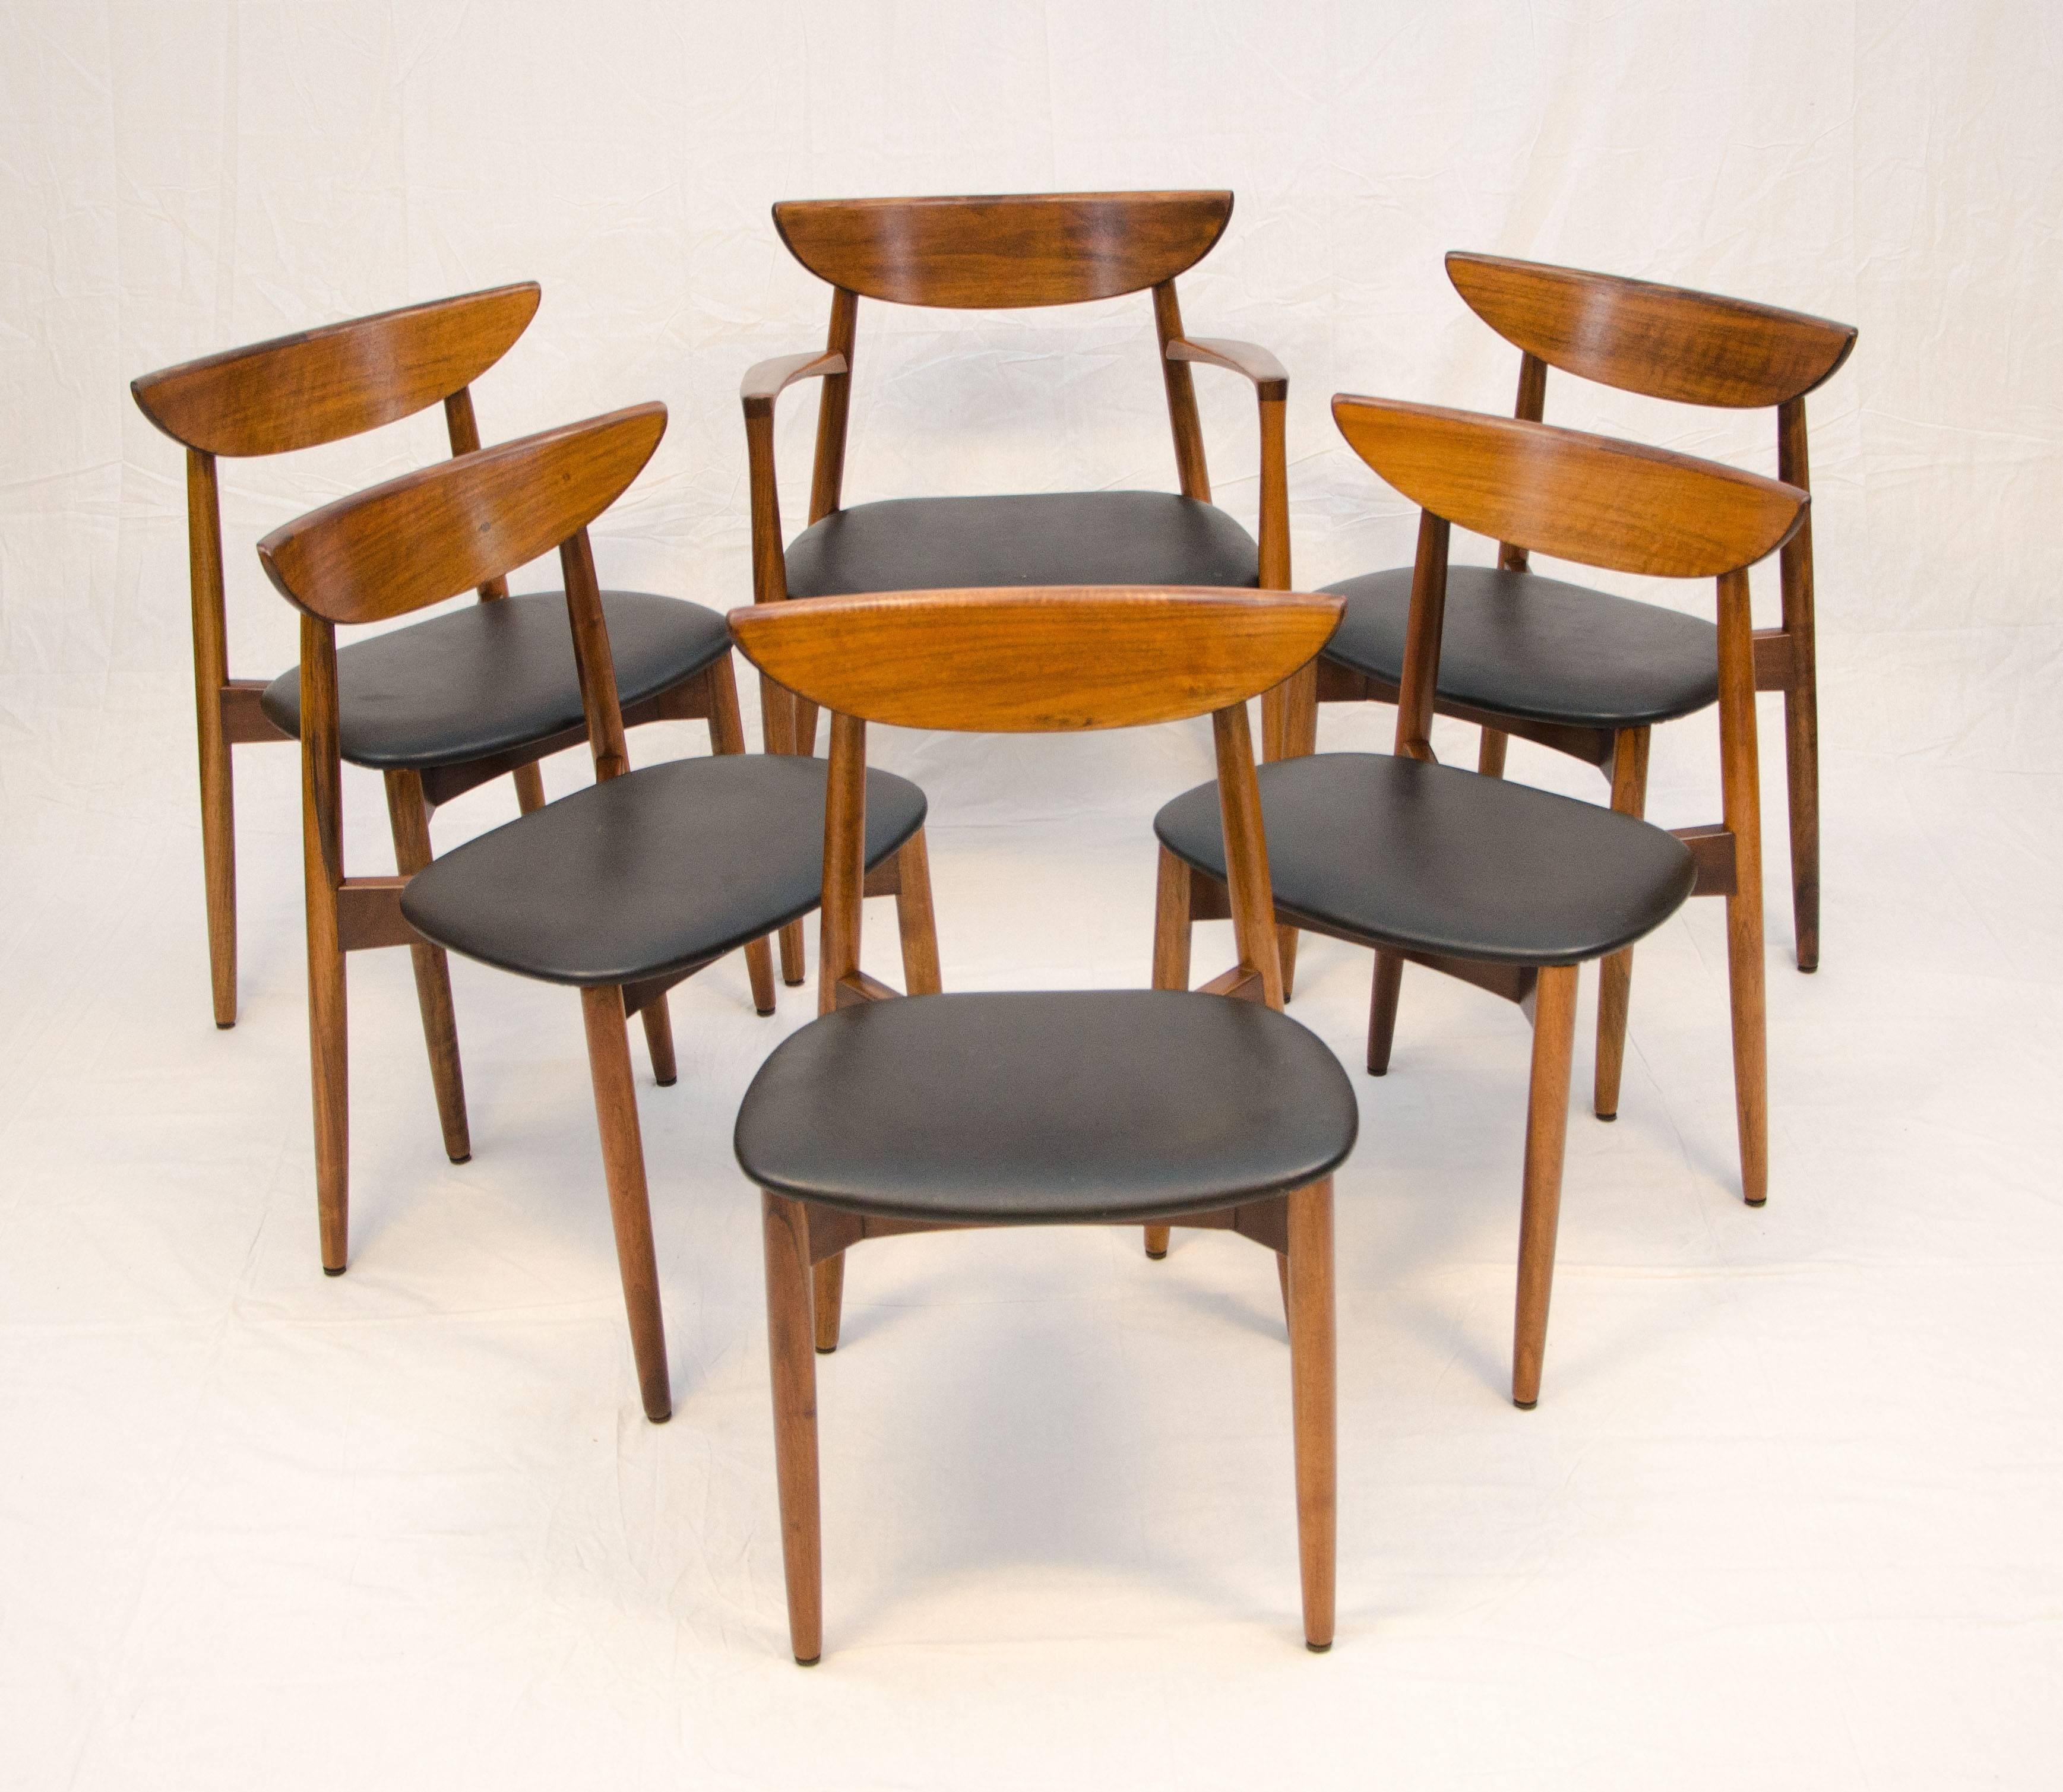 Nice set of six Danish walnut dining chairs designed by Harry Ostergaard and imported my Moreddi. The armchair is slightly larger than the side chairs. Measures: 23